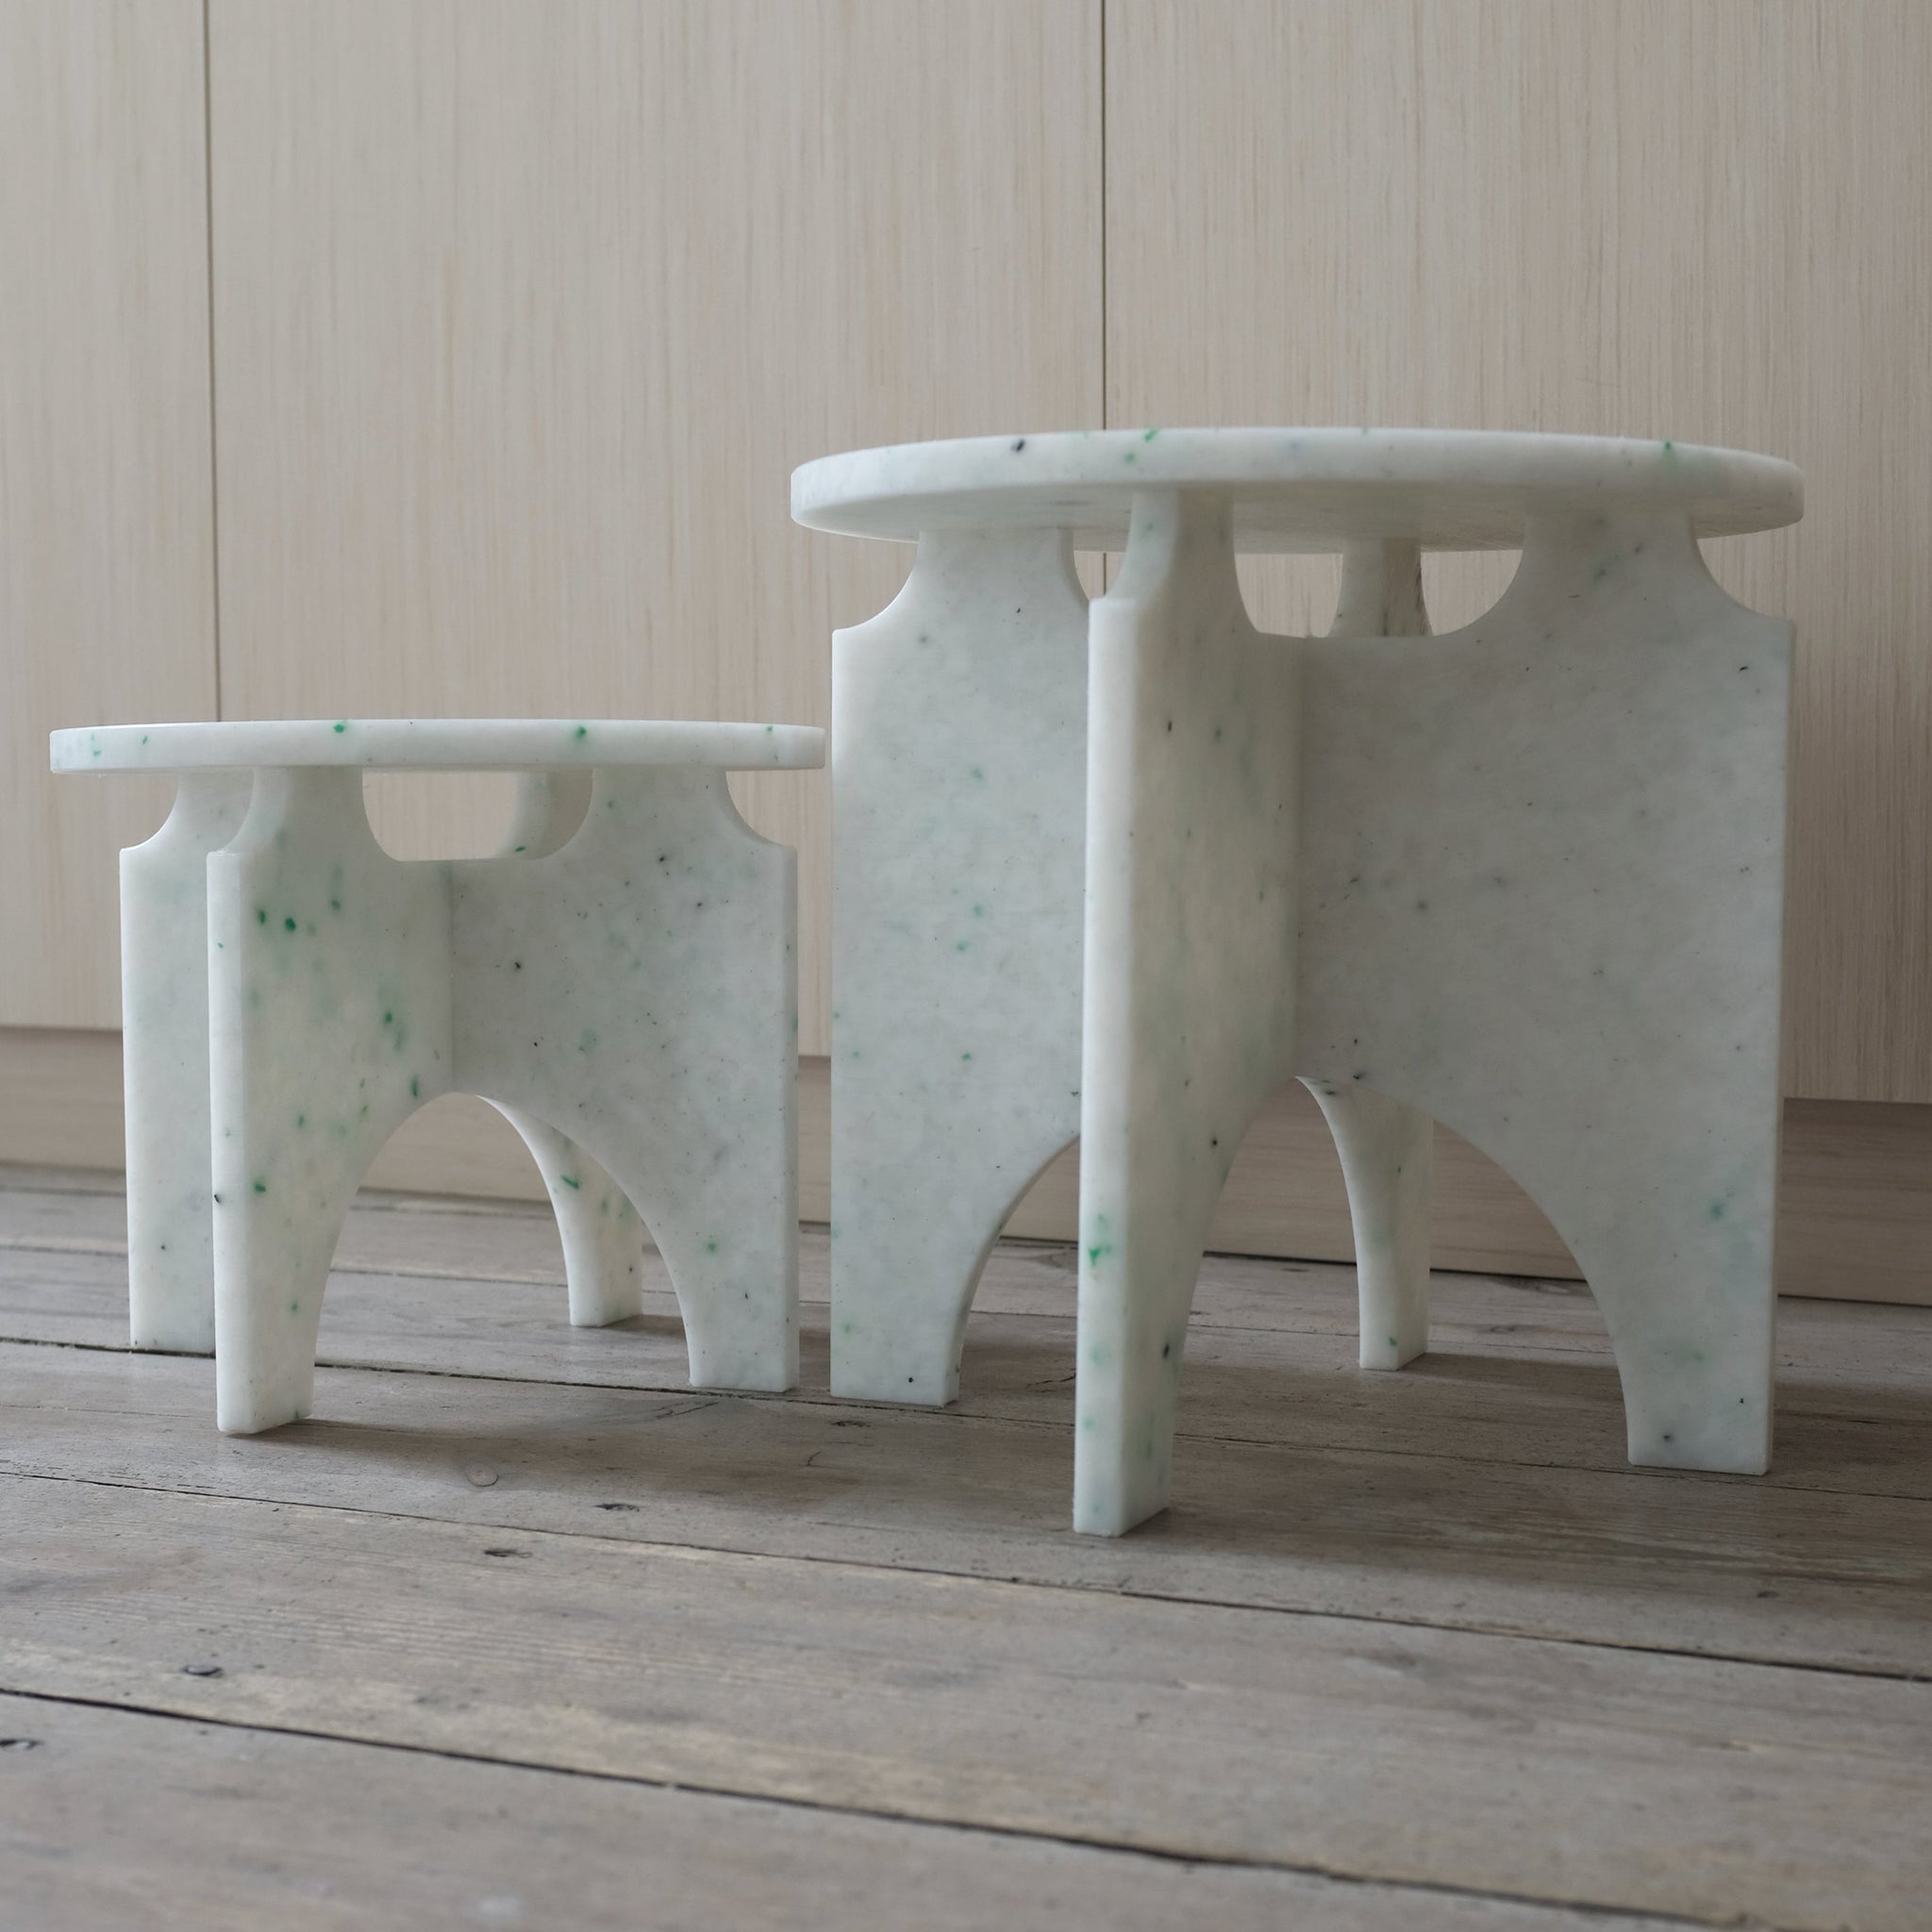 TWO WHITE STOOLS BY THE MINIMONO PROJECT - BRAND FOR ECO FRIENDLY - PLAYFUL - MULTI FUNCTIONAL - SUSTAINABLE - HIGH QUALITY - DESIGN FURNITURE FROM RECYCLED PLASTIC FOR BOTH ADULT AND CHILDREN MADE IN BERLIN GERMANY